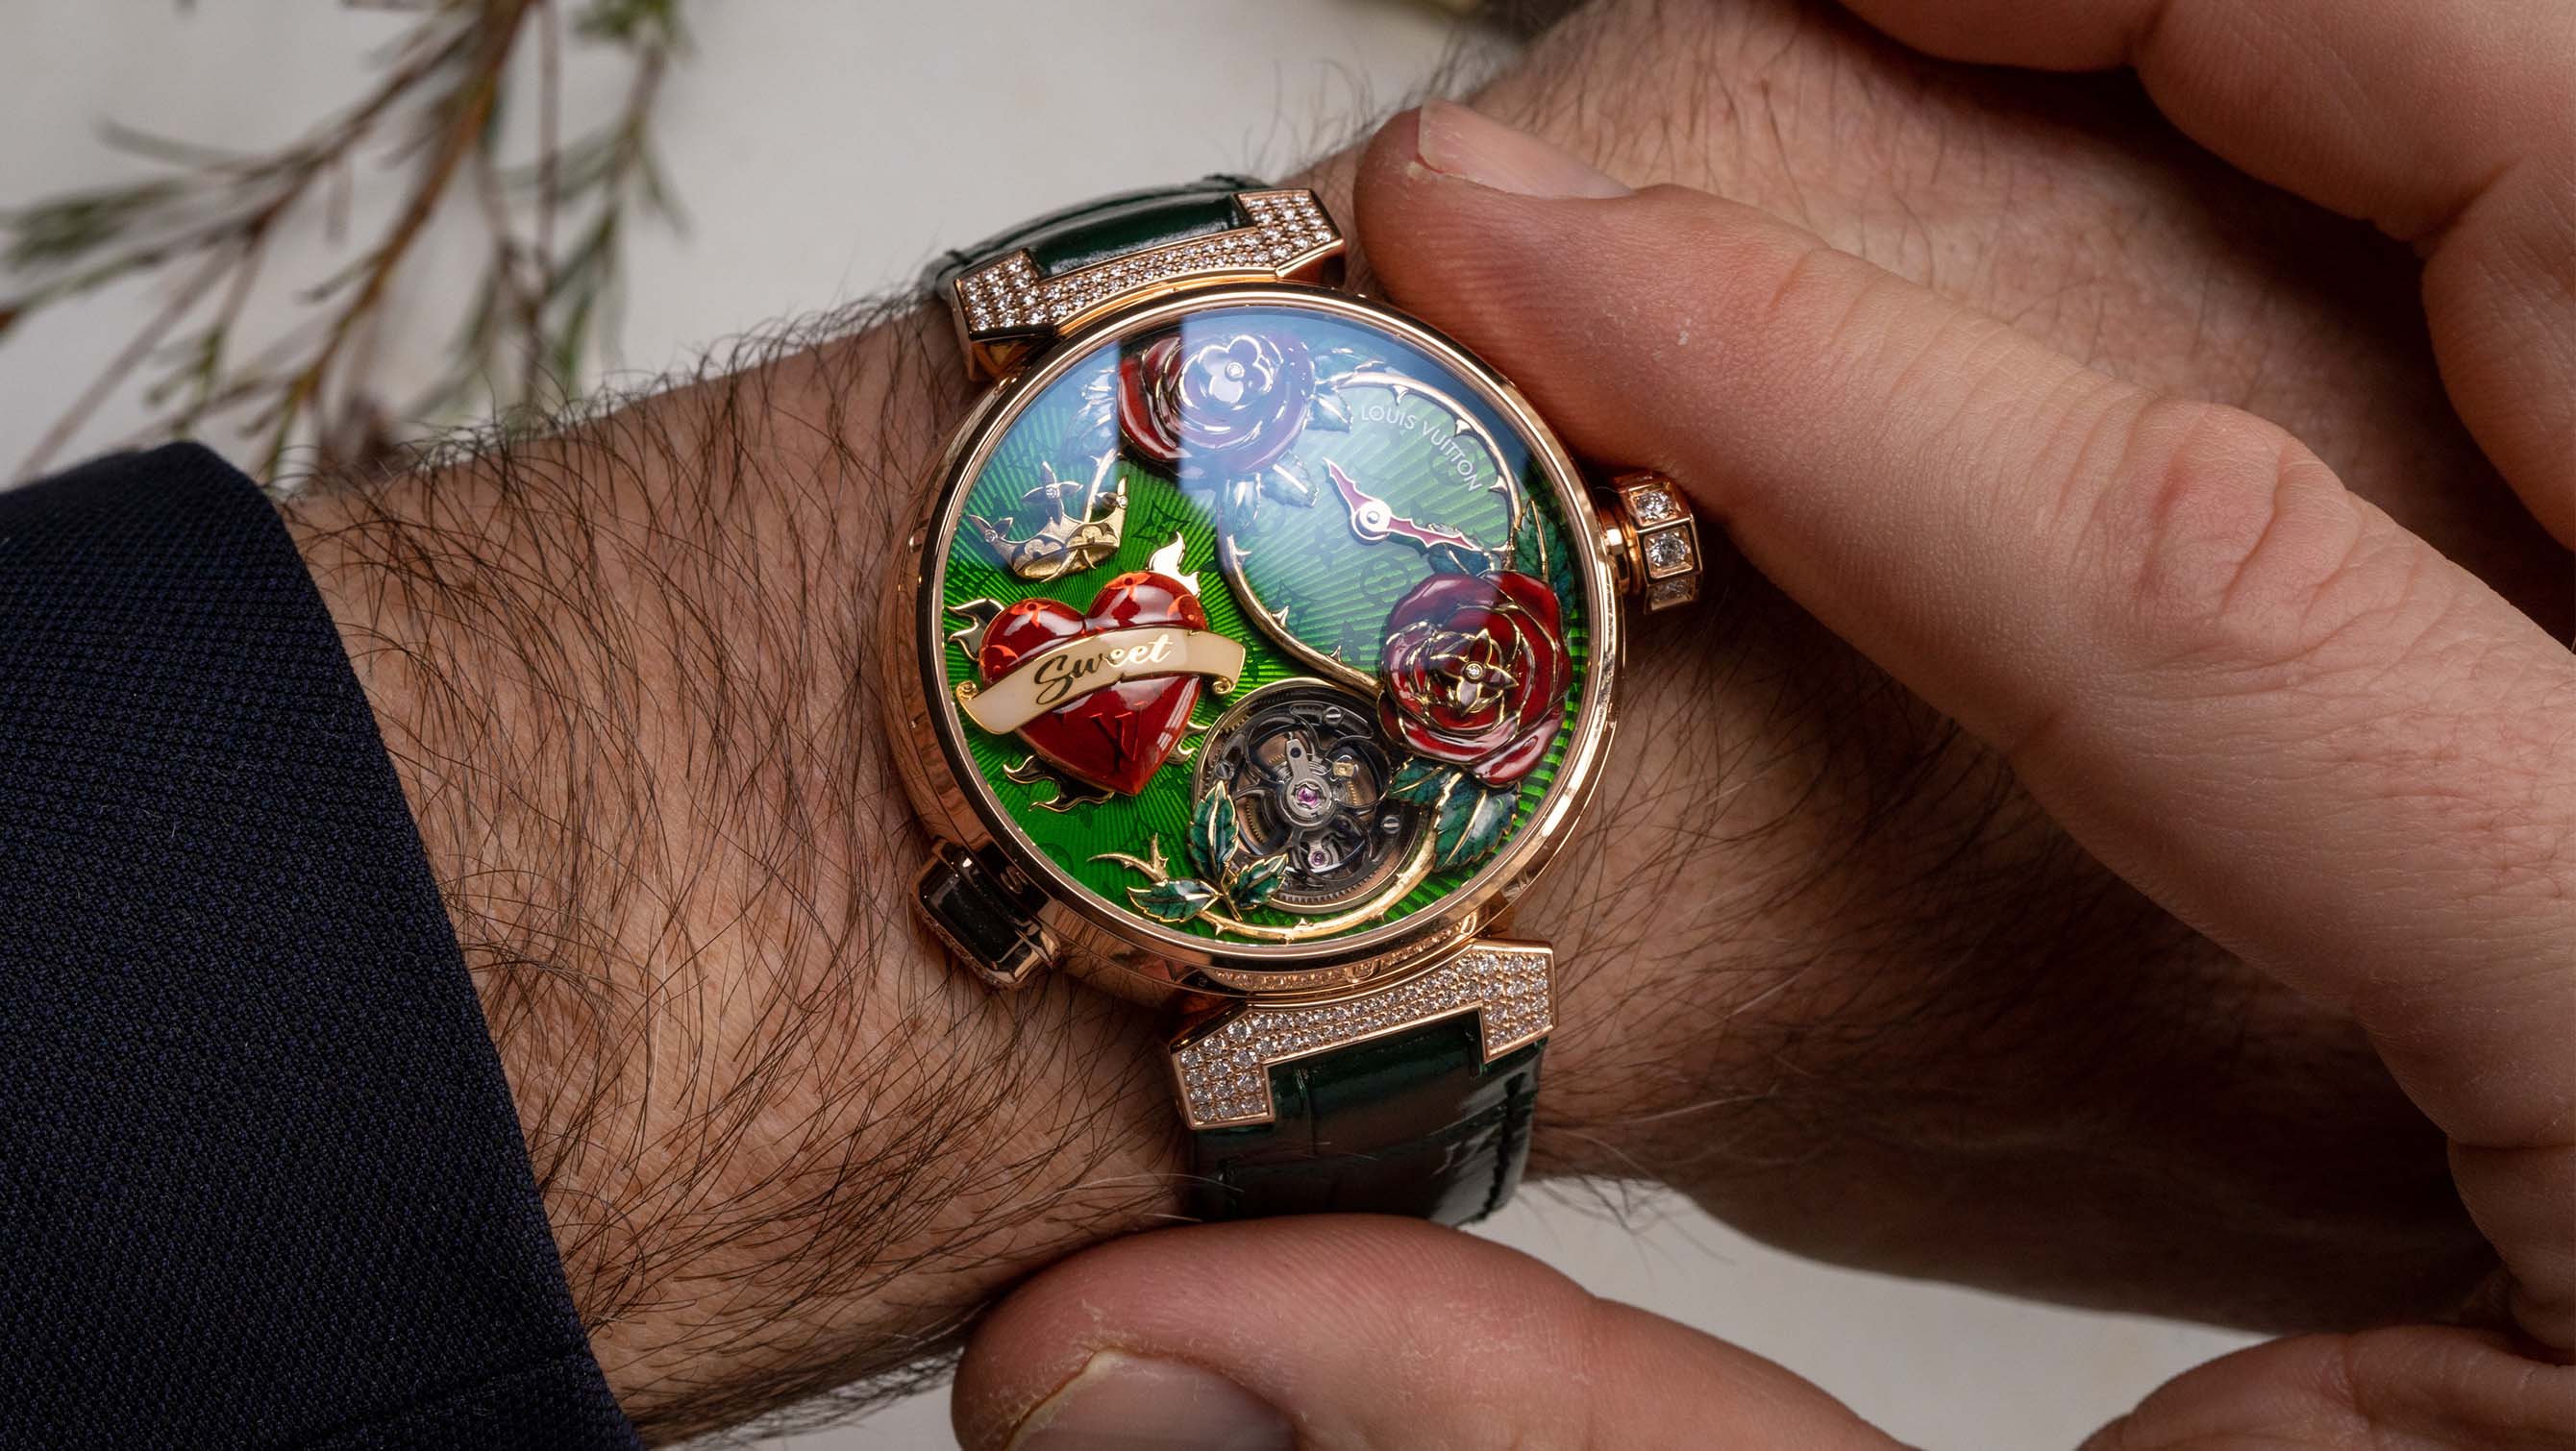 Beware of falling in love with the Louis Vuitton Tambour Fiery Heart Automata